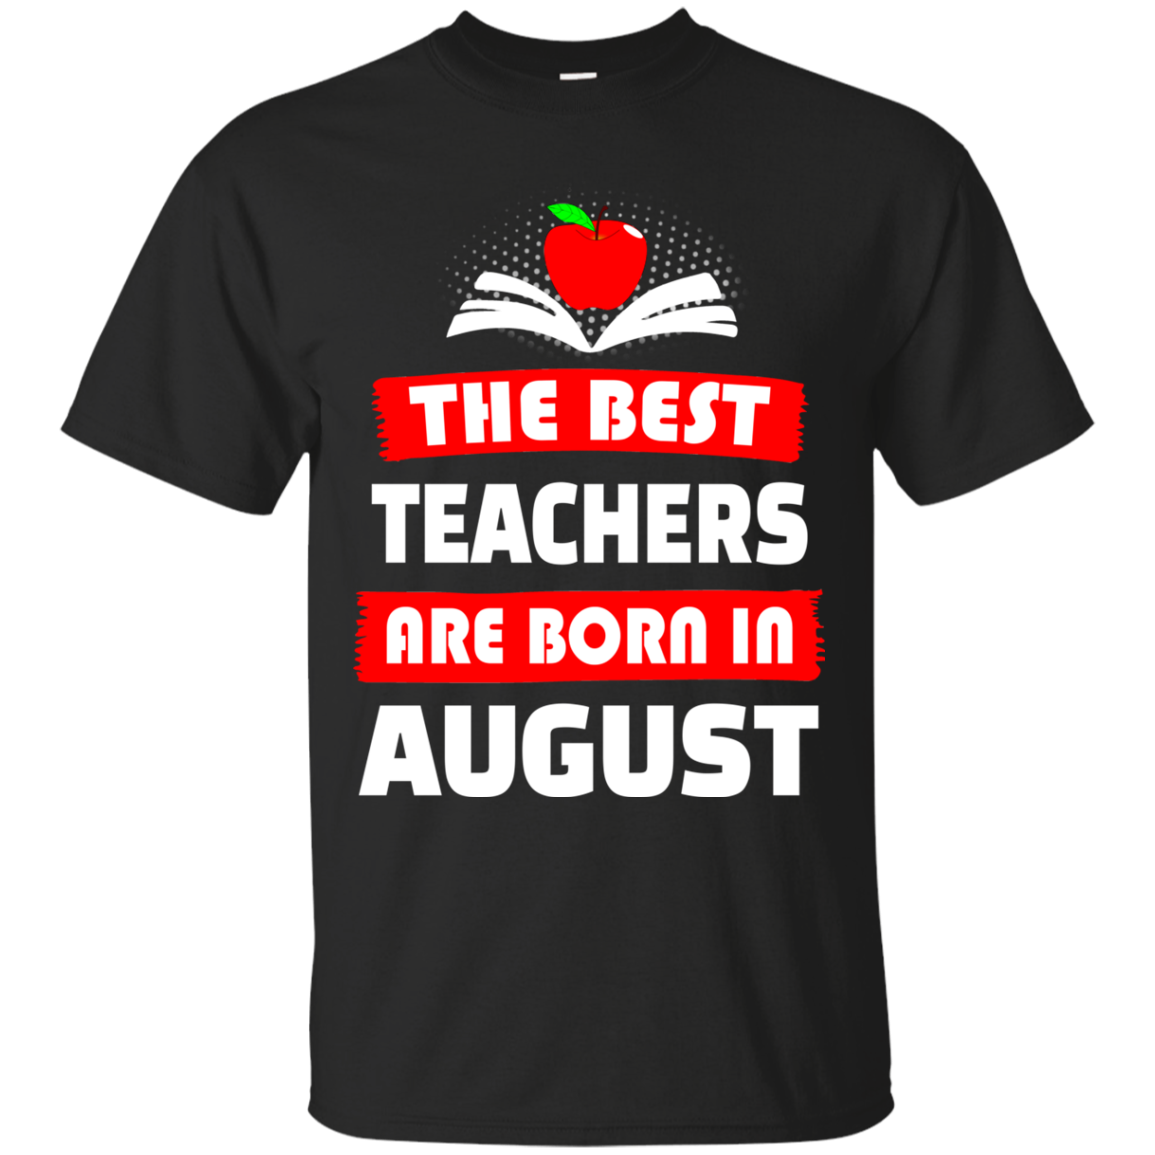 The best teachers are born in August shirt, tank, hoodie